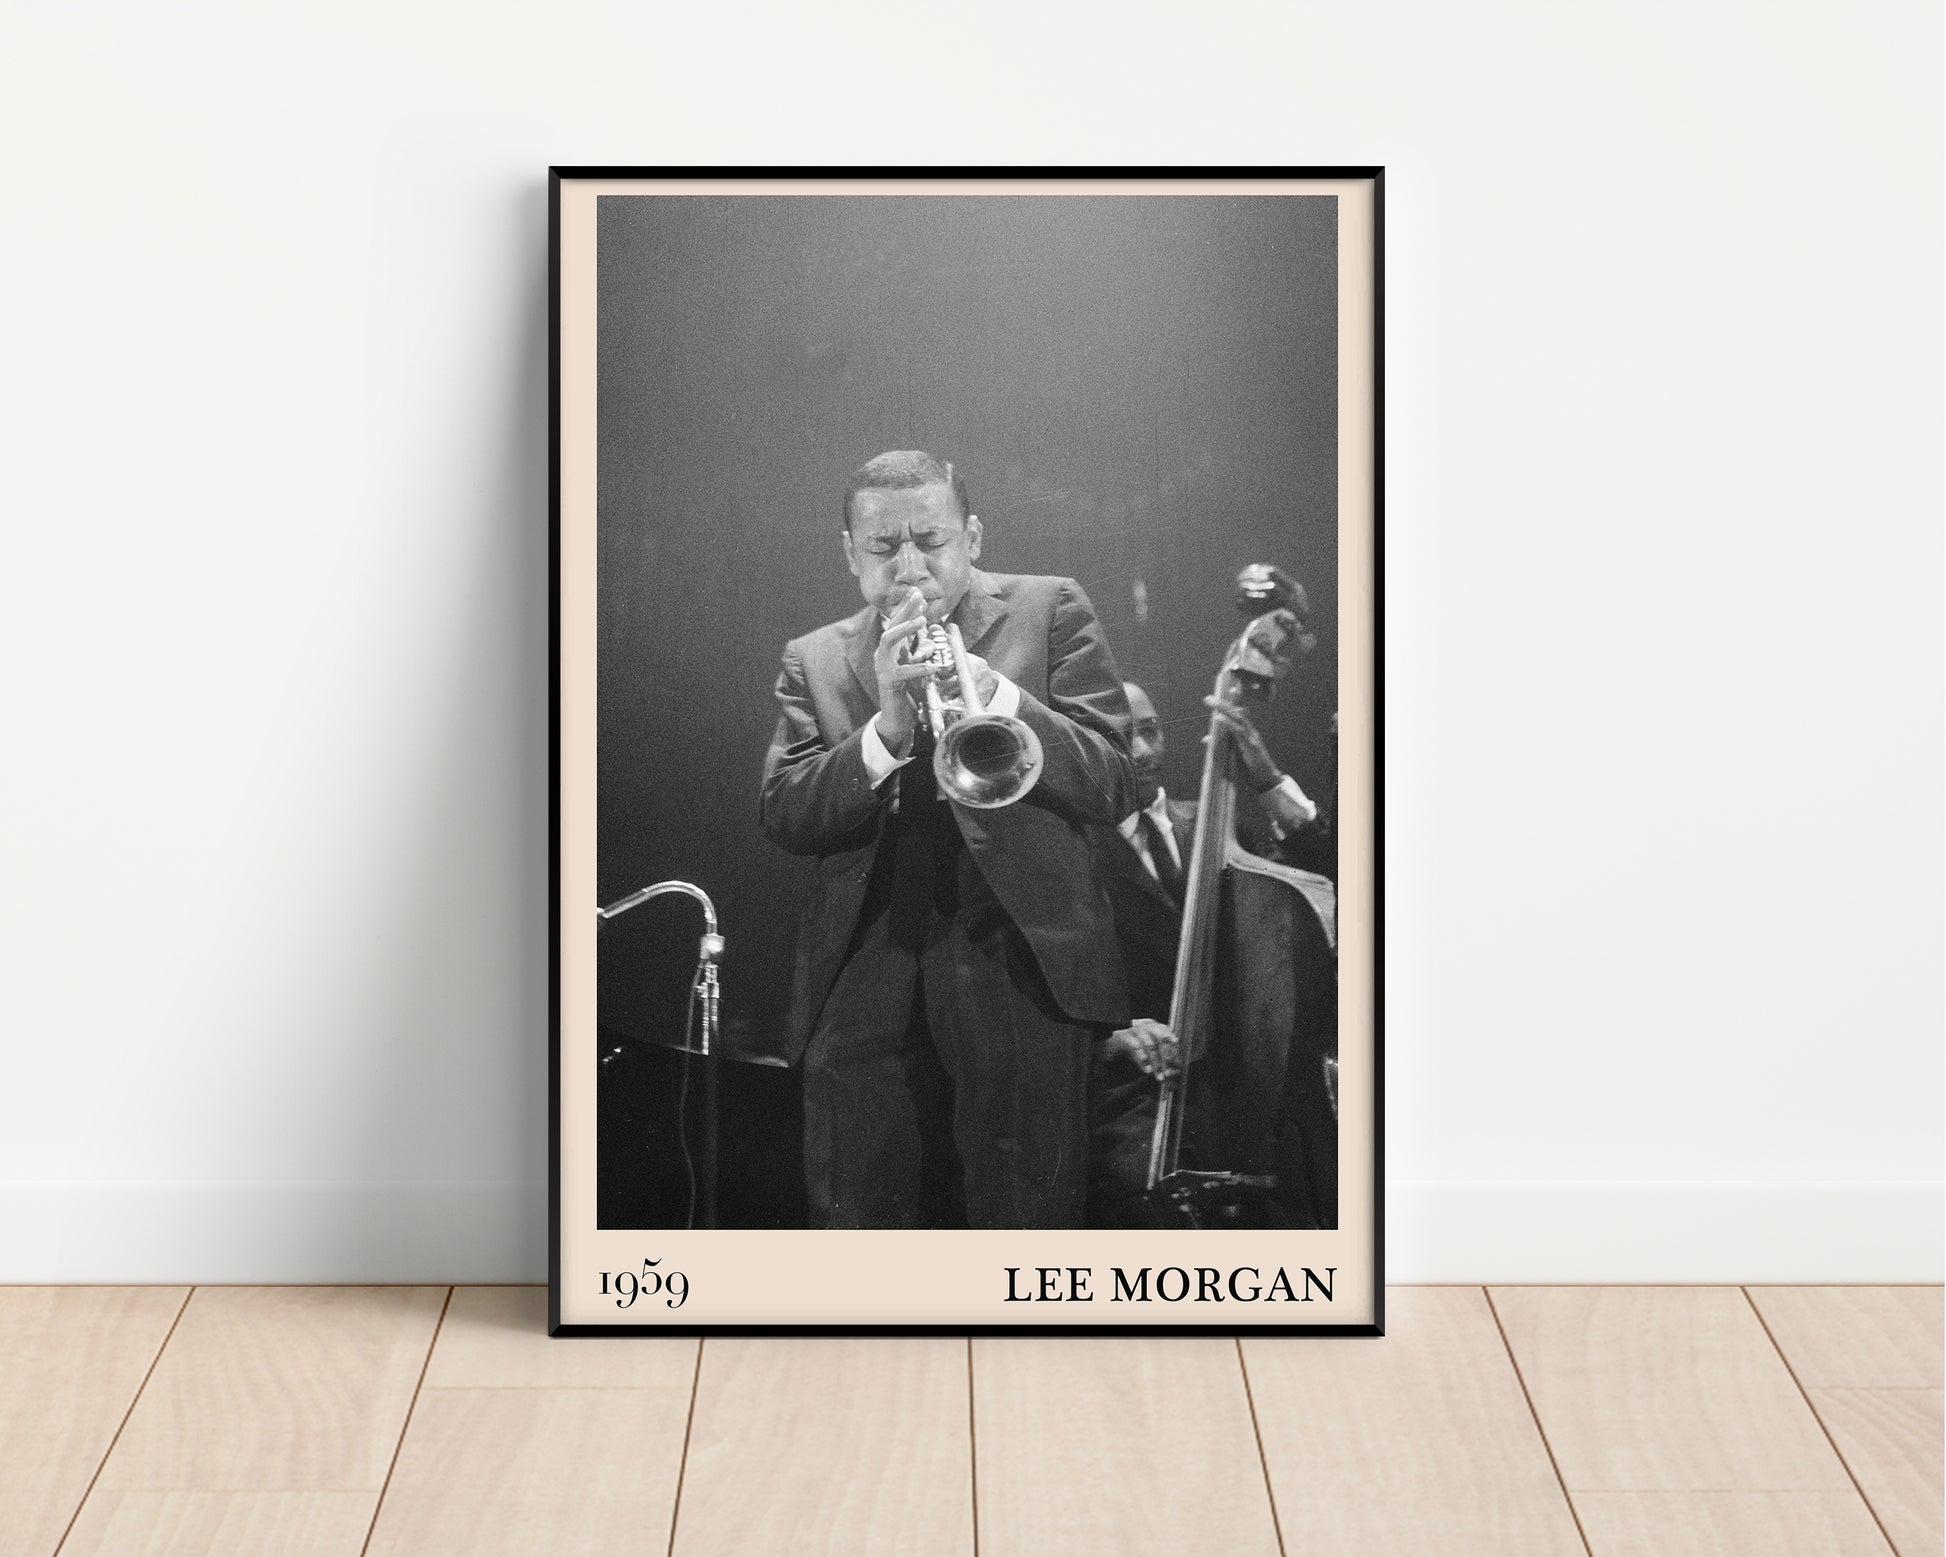 1959 photograph of Lee Morgan playing the trumpet, transformed into a stylish black-framed jazz poster resting against a white wall